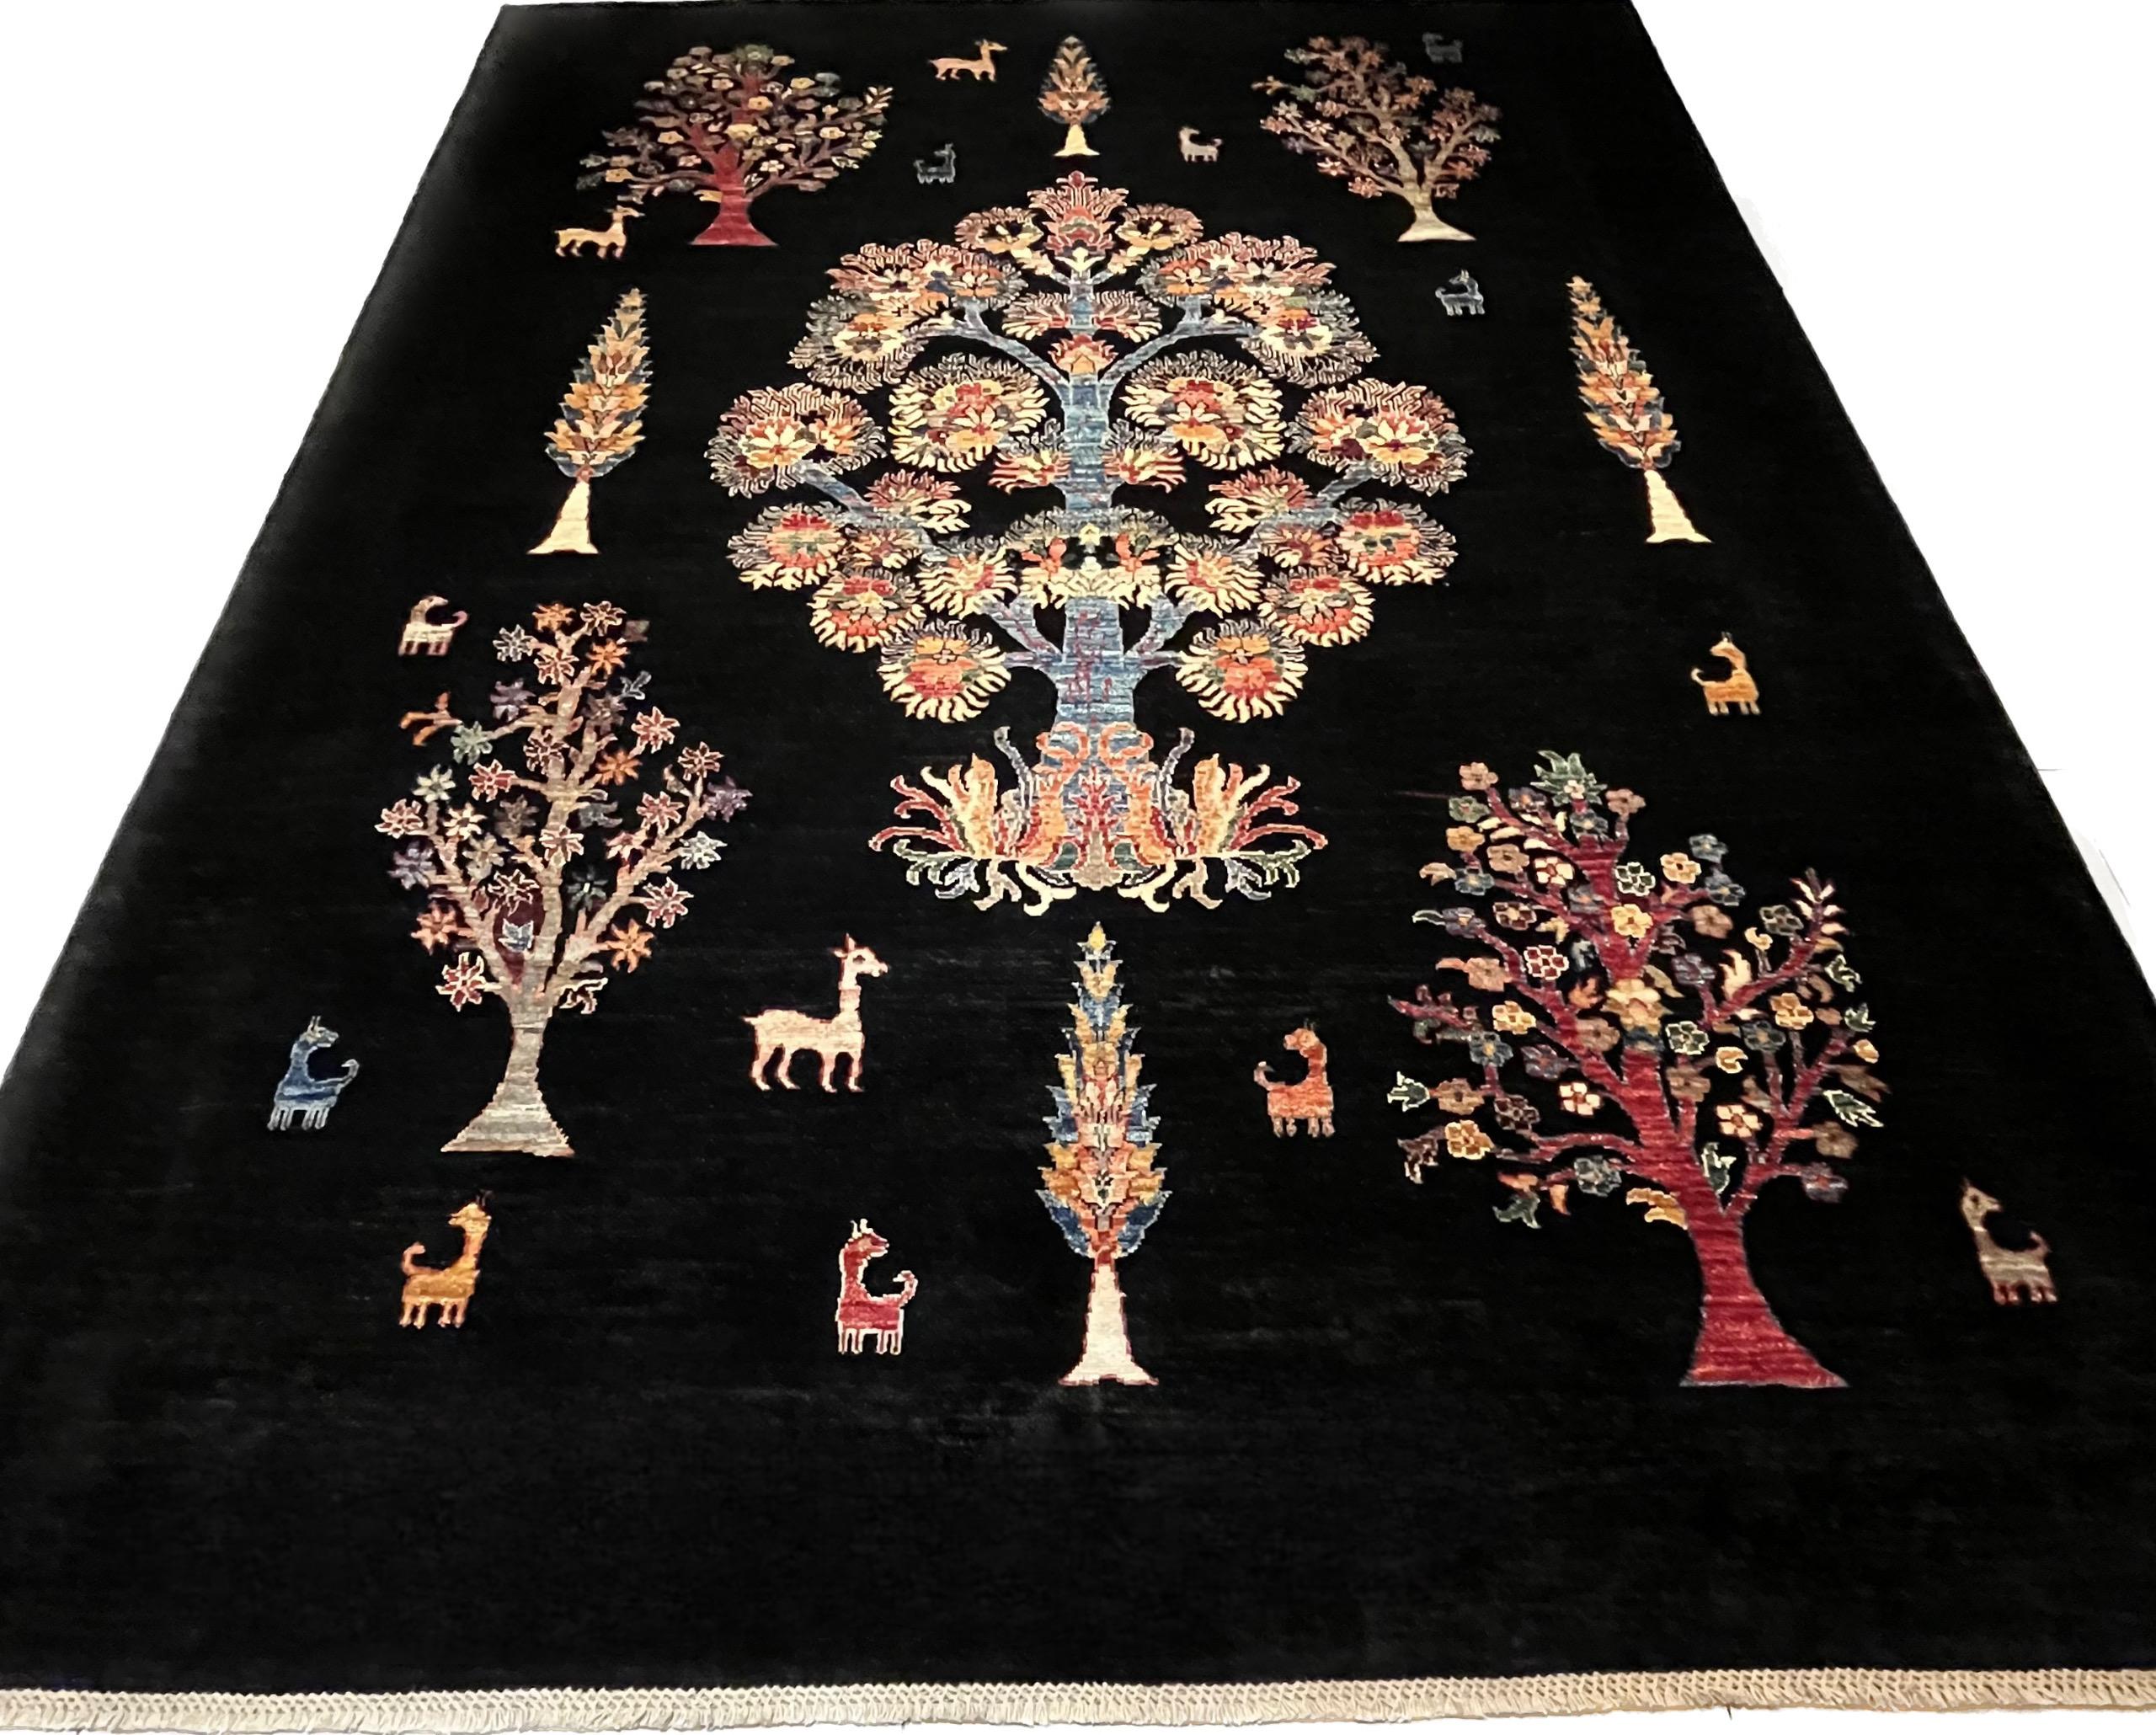 Gabbeh Loribaff Rug 266x200 cm

These very beautiful carpets are made by nomads from the provinces of Kashkai and Loristan, in the southwest of Iran.
They are known for their primitive and naive designs, with some exhibiting a more modern